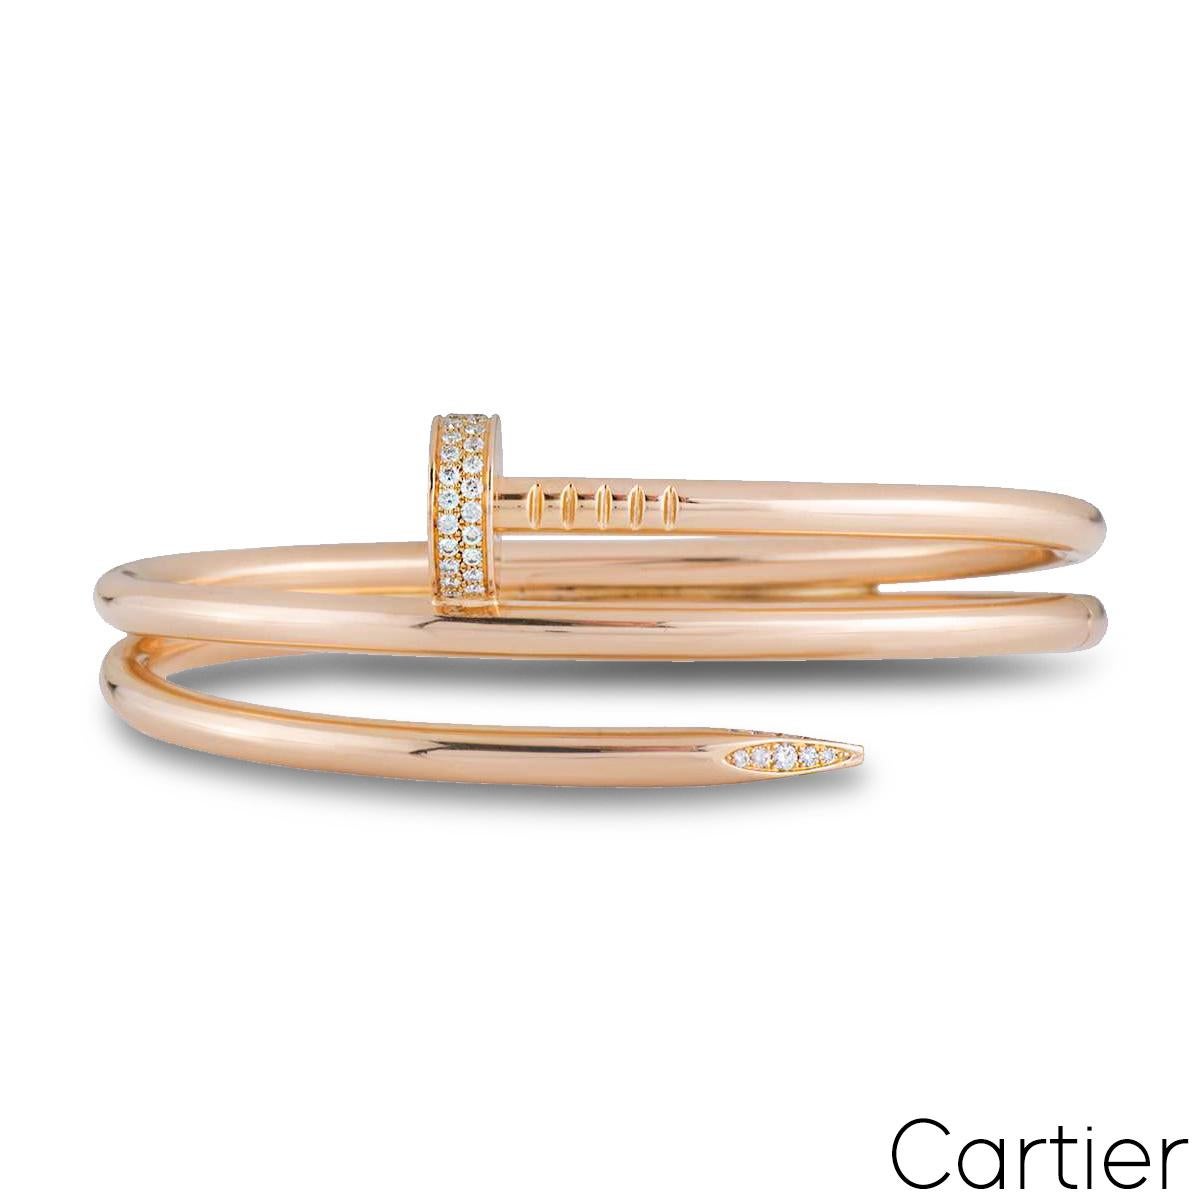 An 18k rose gold and diamond Cartier bracelet from the Juste Un Clou collection. The bracelet is in the style of a nail wrapping around the wrist with 62 round brilliant cut pave set diamonds to the head and tip, totalling 0.51ct. The bracelet